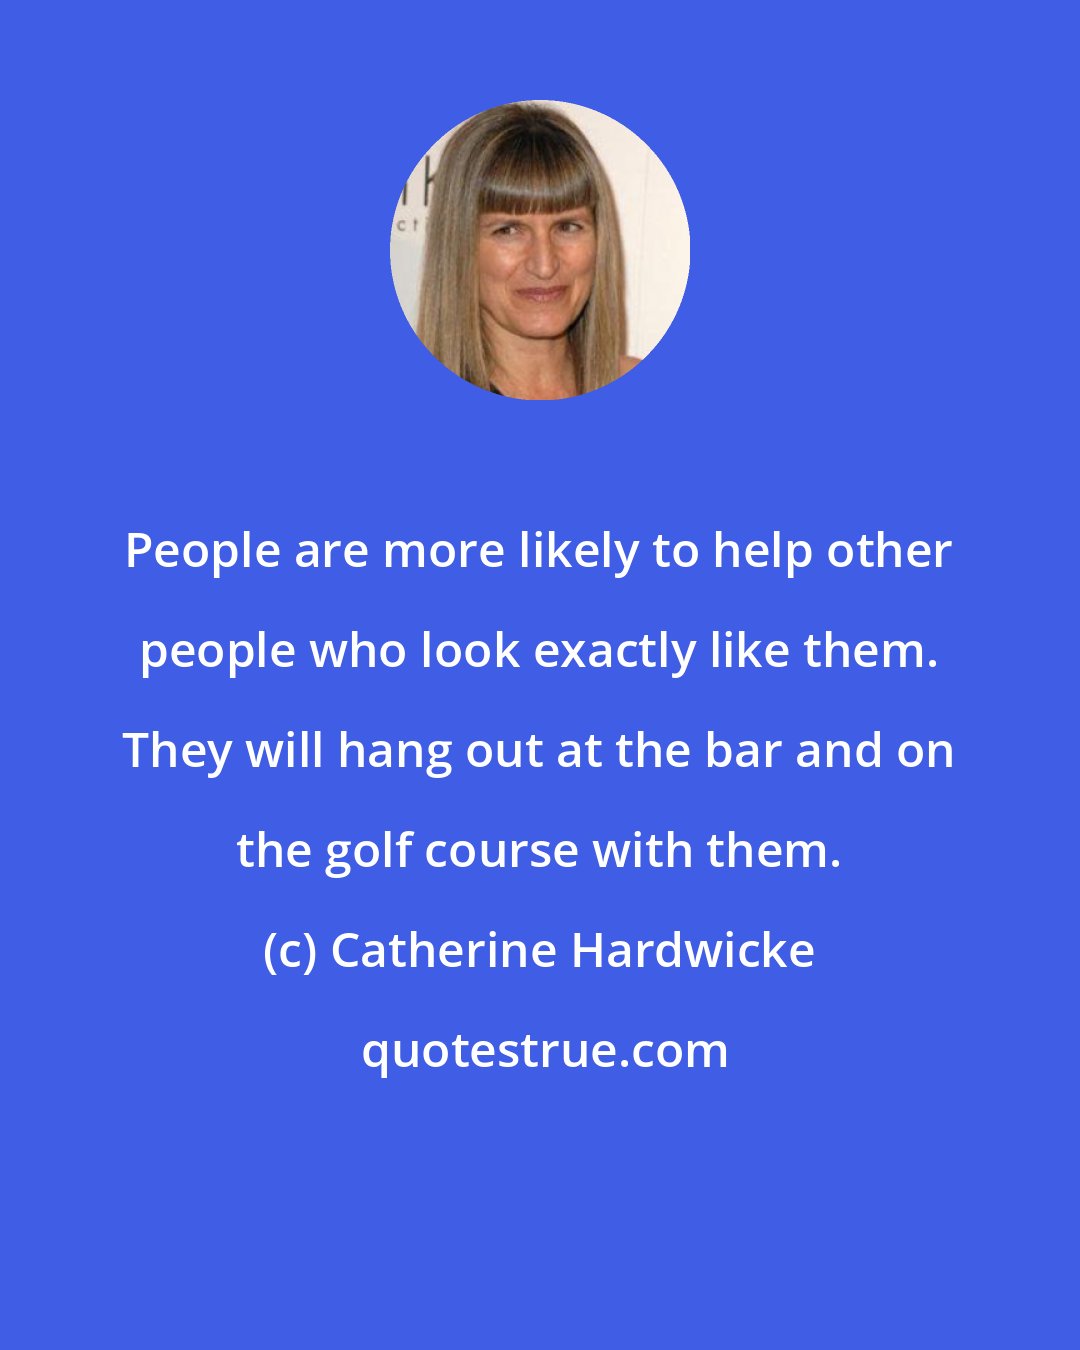 Catherine Hardwicke: People are more likely to help other people who look exactly like them. They will hang out at the bar and on the golf course with them.